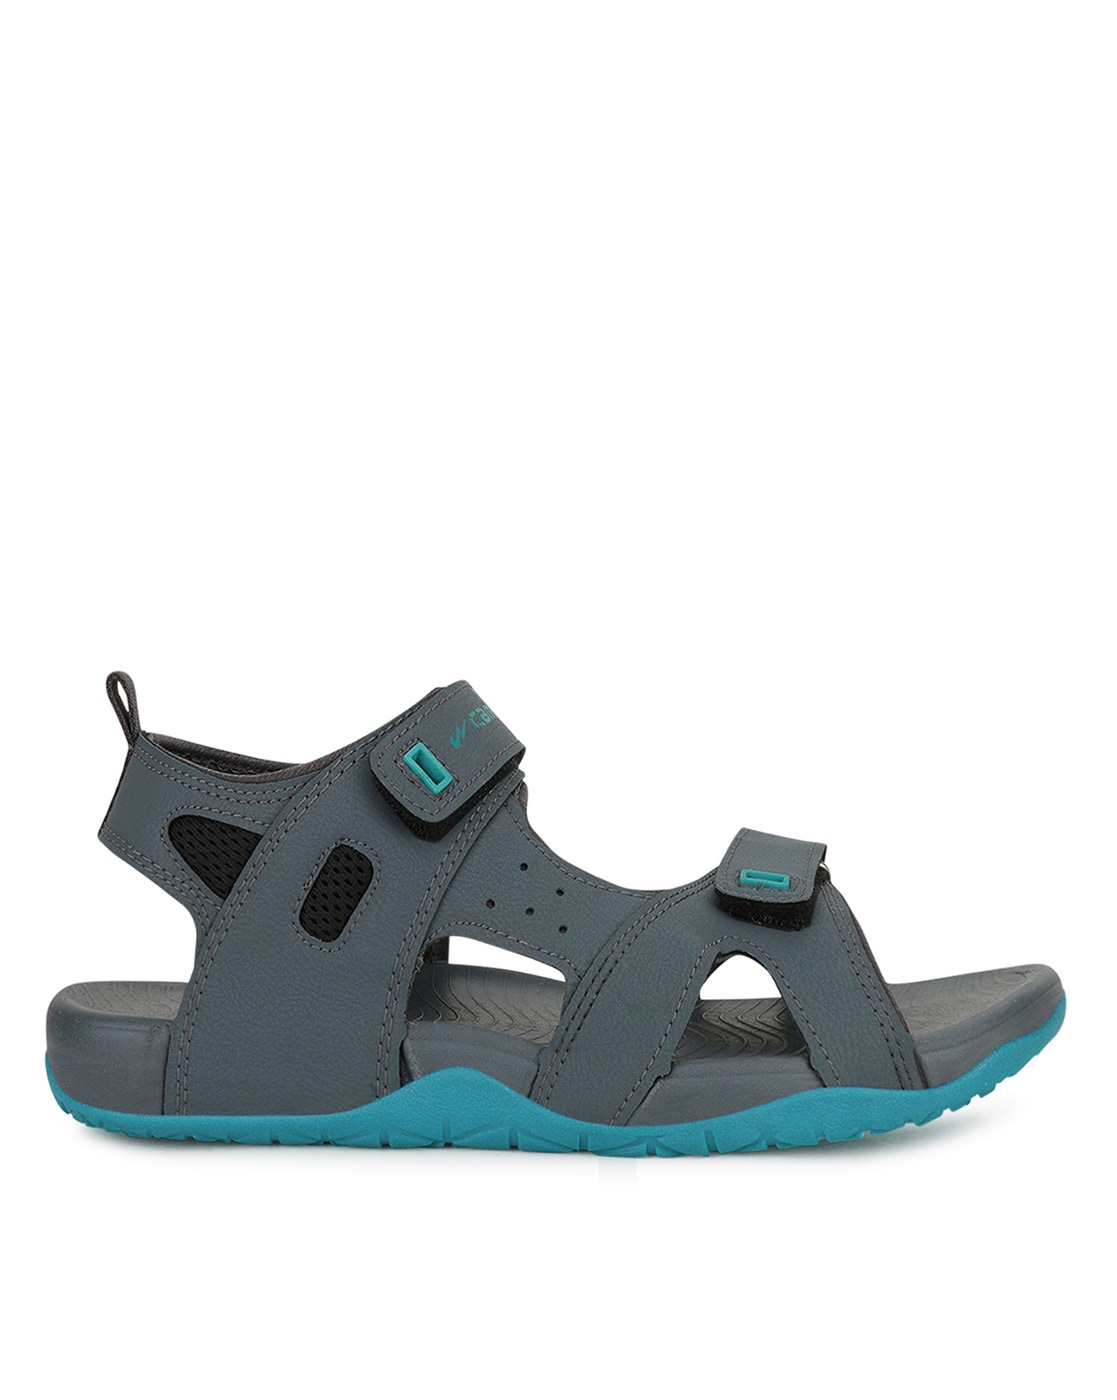 Buy F SPORTS SP18 Floater Sandals Online @ ₹1490 from ShopClues